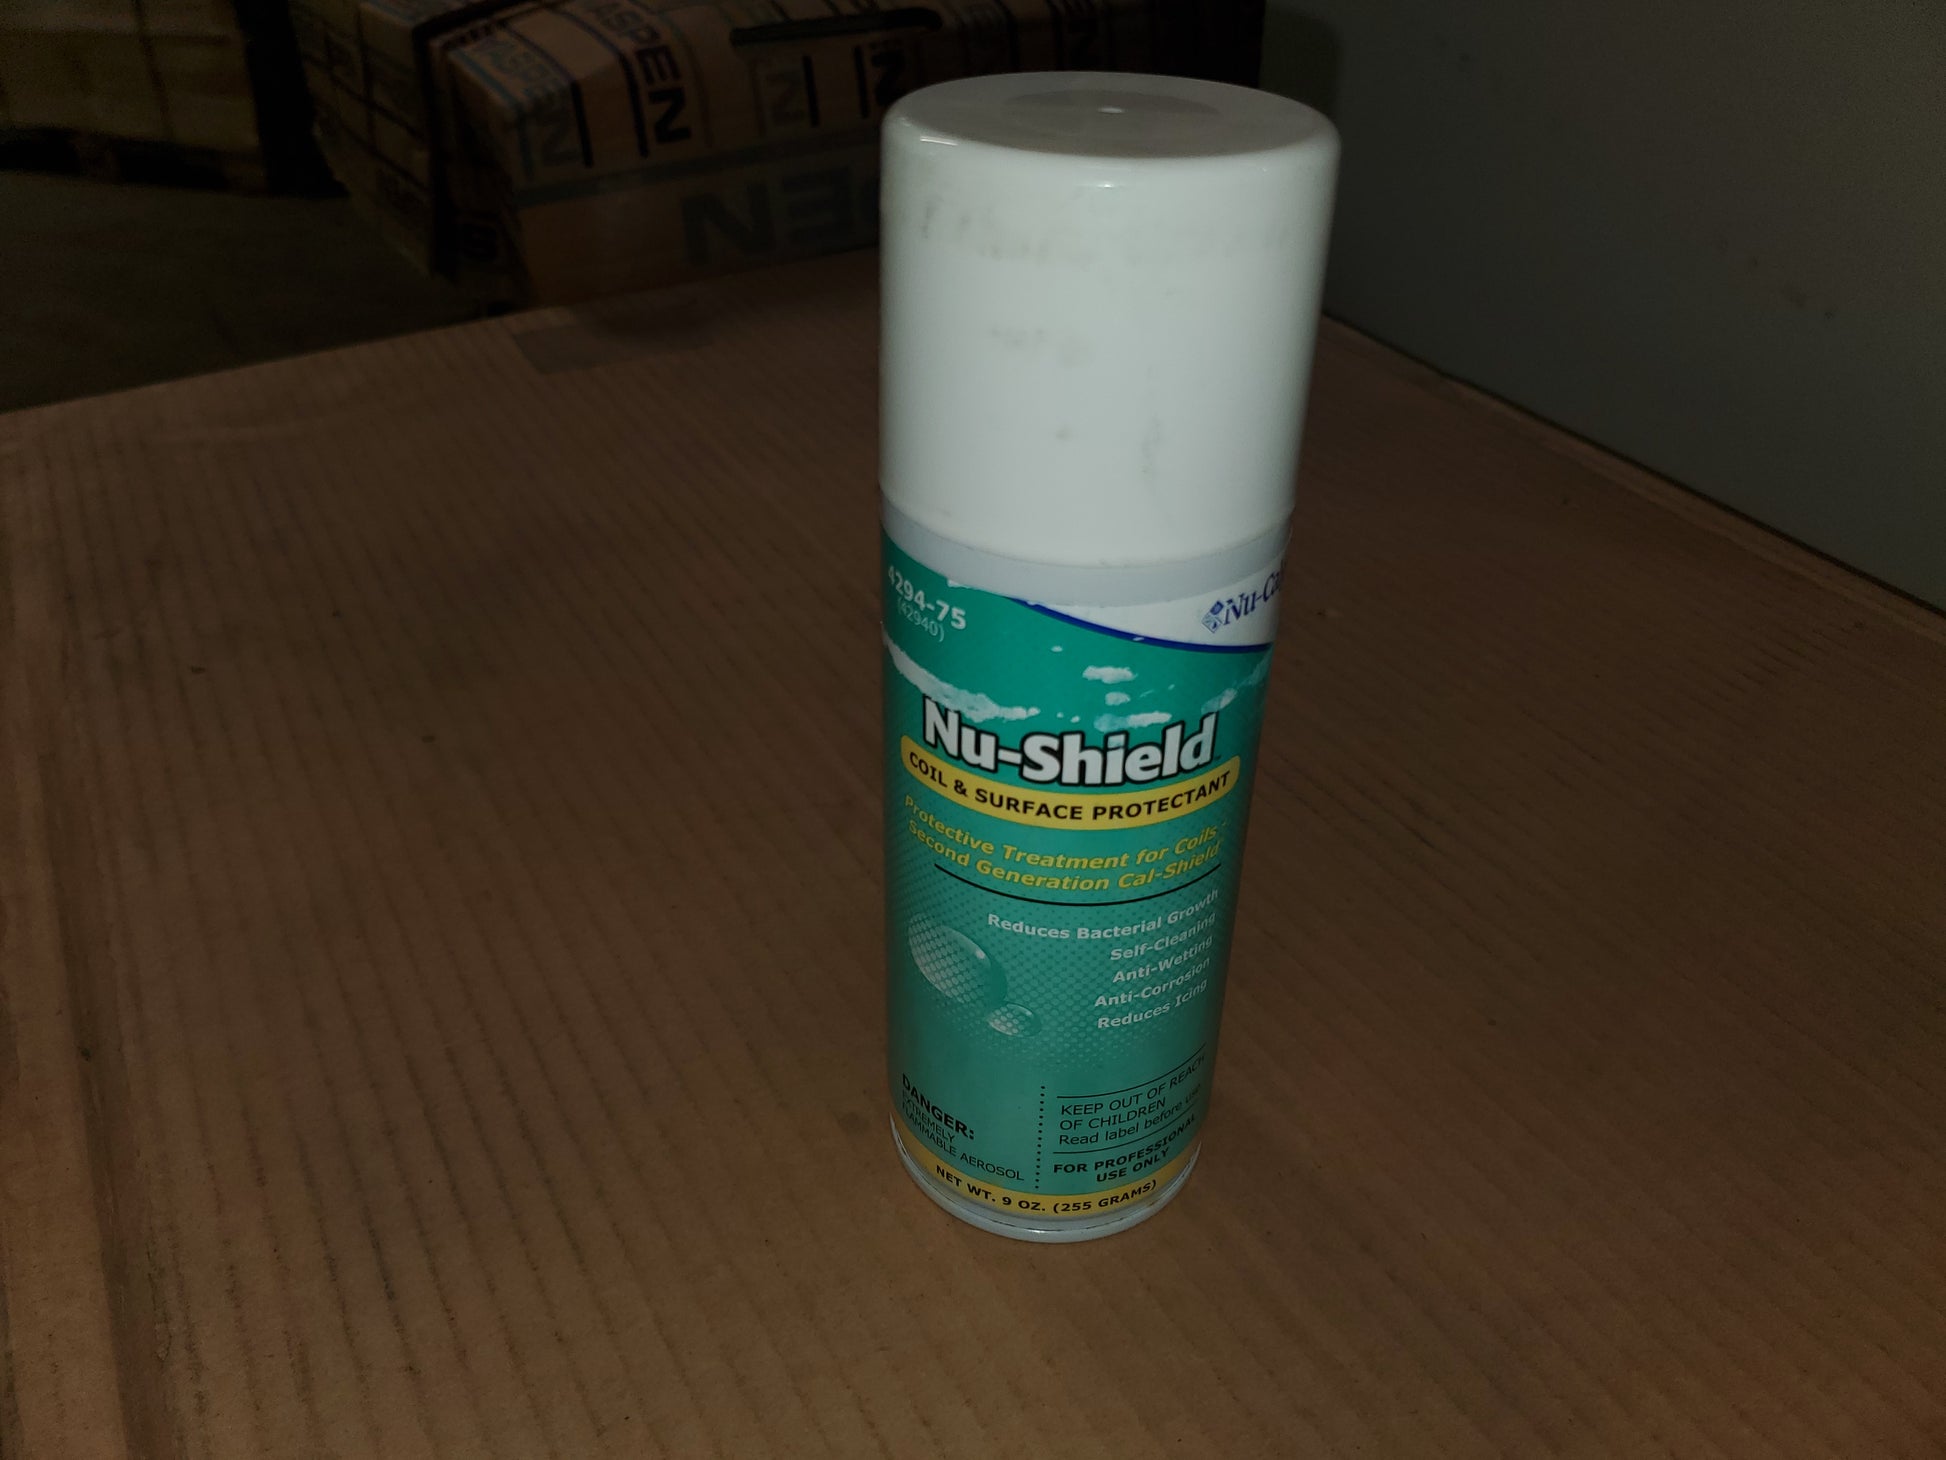 9 OZ CAN NU-SHIELD COIL & SURFACE PROTECTANT